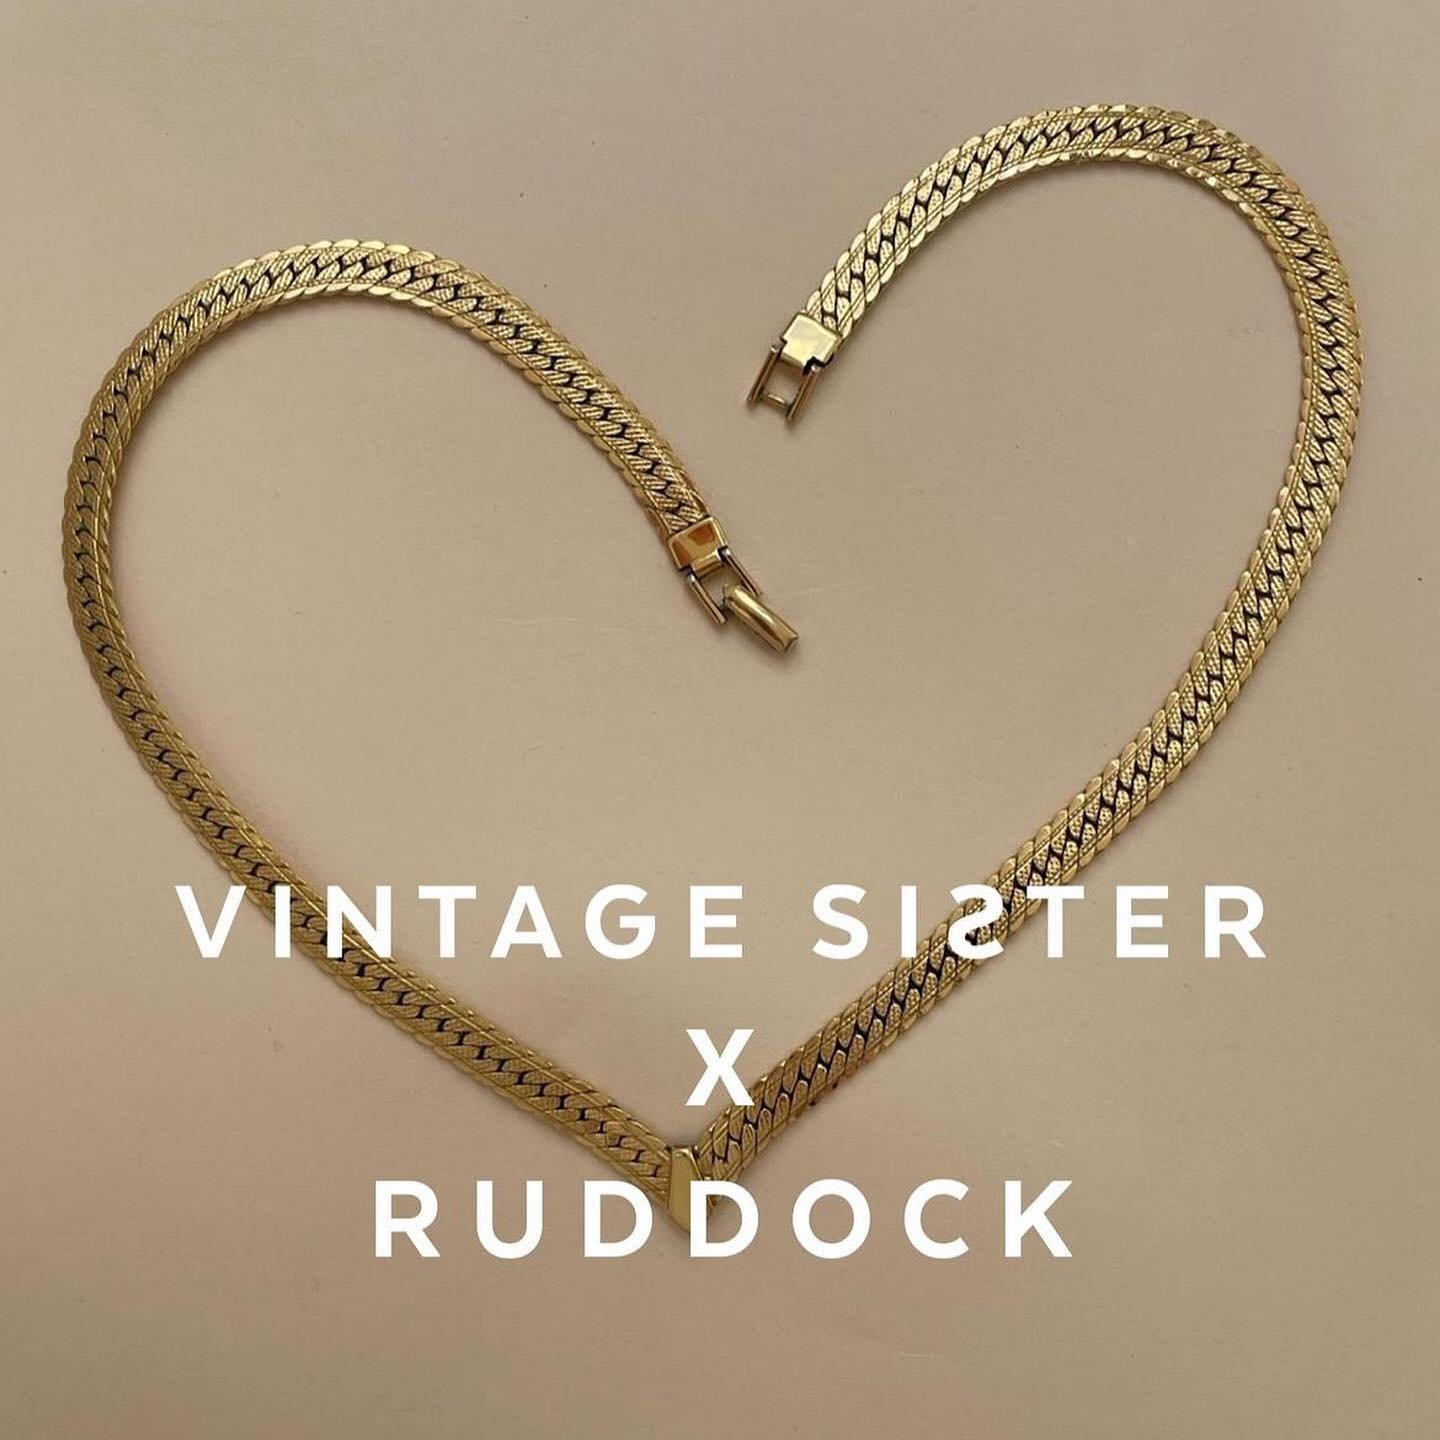 ✨ TODAY ✨ 2PM ✨
A little reminder that our latest drop of vintage jewellery in collaboration with @sisters_love_vintage launches today. 
All profits will be donated towards helping families evacuate from Gaza. Available to shop at www.vintage sister.